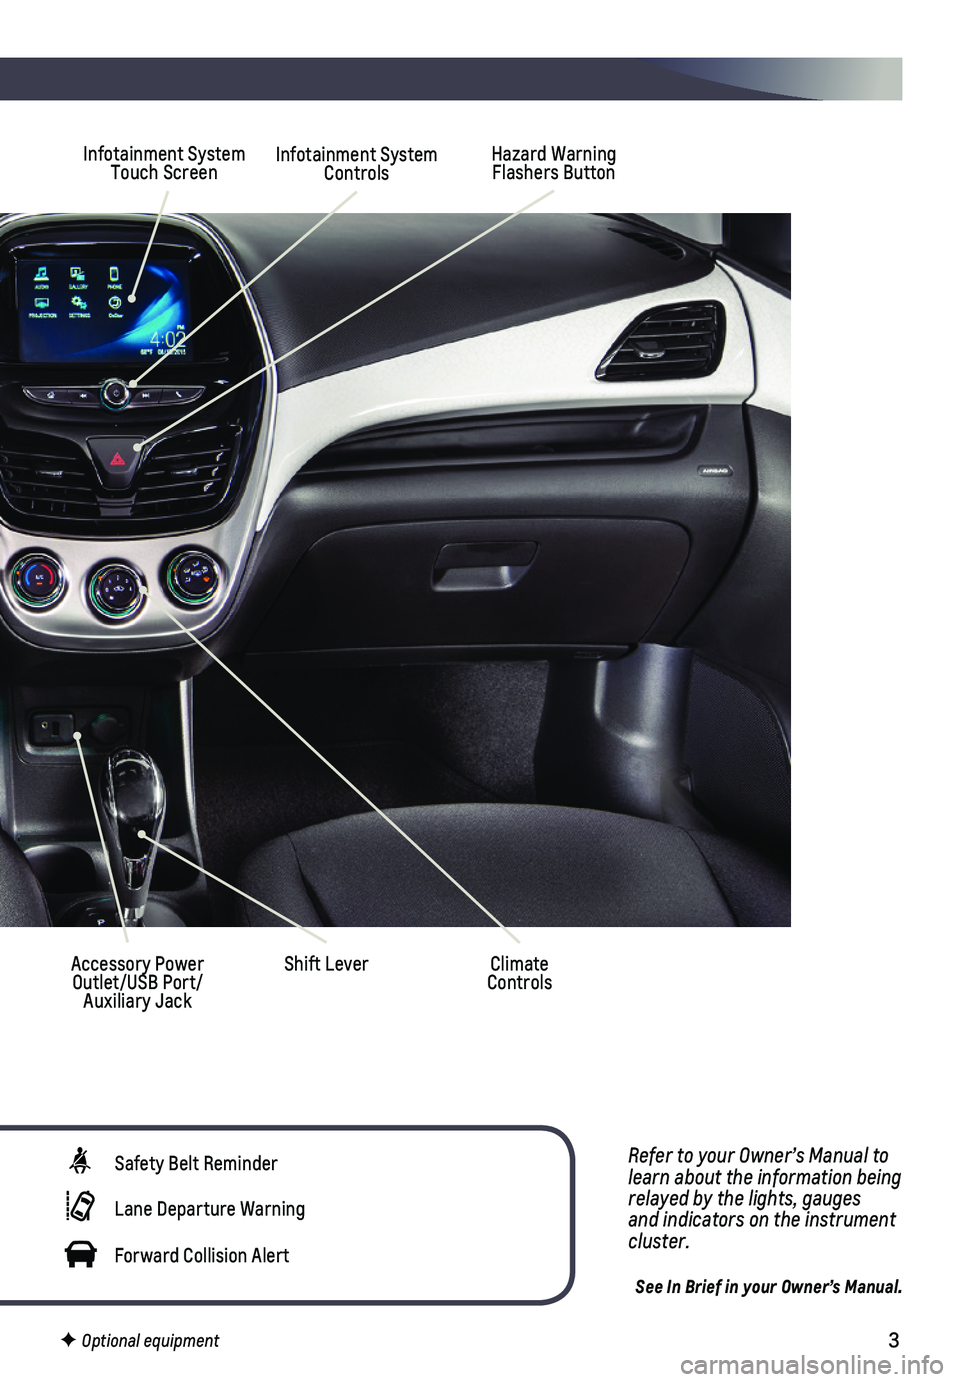 CHEVROLET SPARK 2018  Get To Know Guide 3
Refer to your Owner’s Manual to learn about the information being relayed by the lights, gauges and indicators on the instrument cluster.
See In Brief in your Owner’s Manual.
Hazard Warning Flas